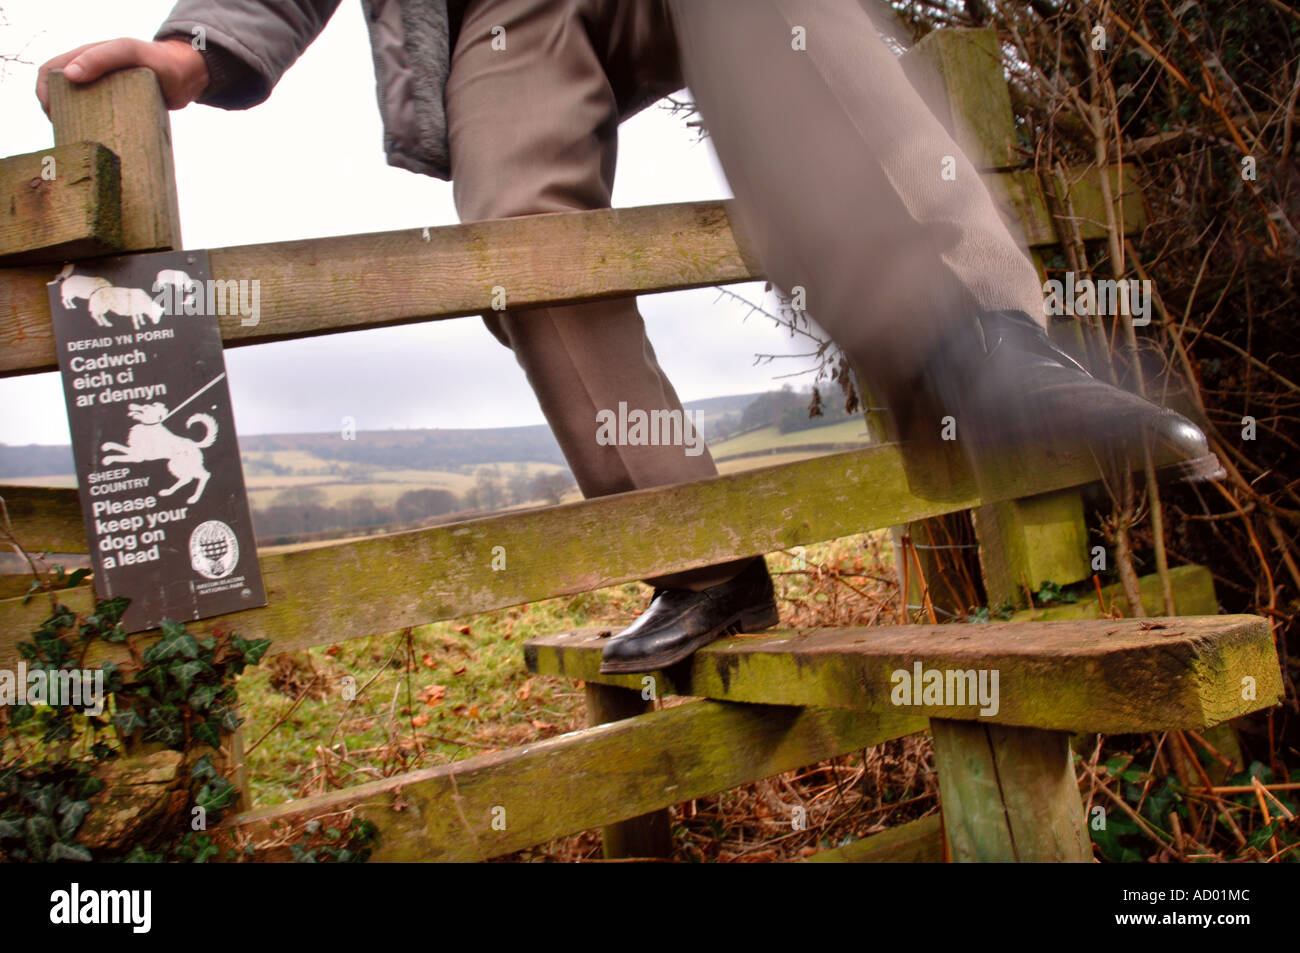 A RETIRED MAN STEPS ACROSS A WOODEN STILE WITH A PLEASE KEEP YOUR DOG ON A LEAD SIGN NEAR ABERGAVENNY WALES UK Stock Photo